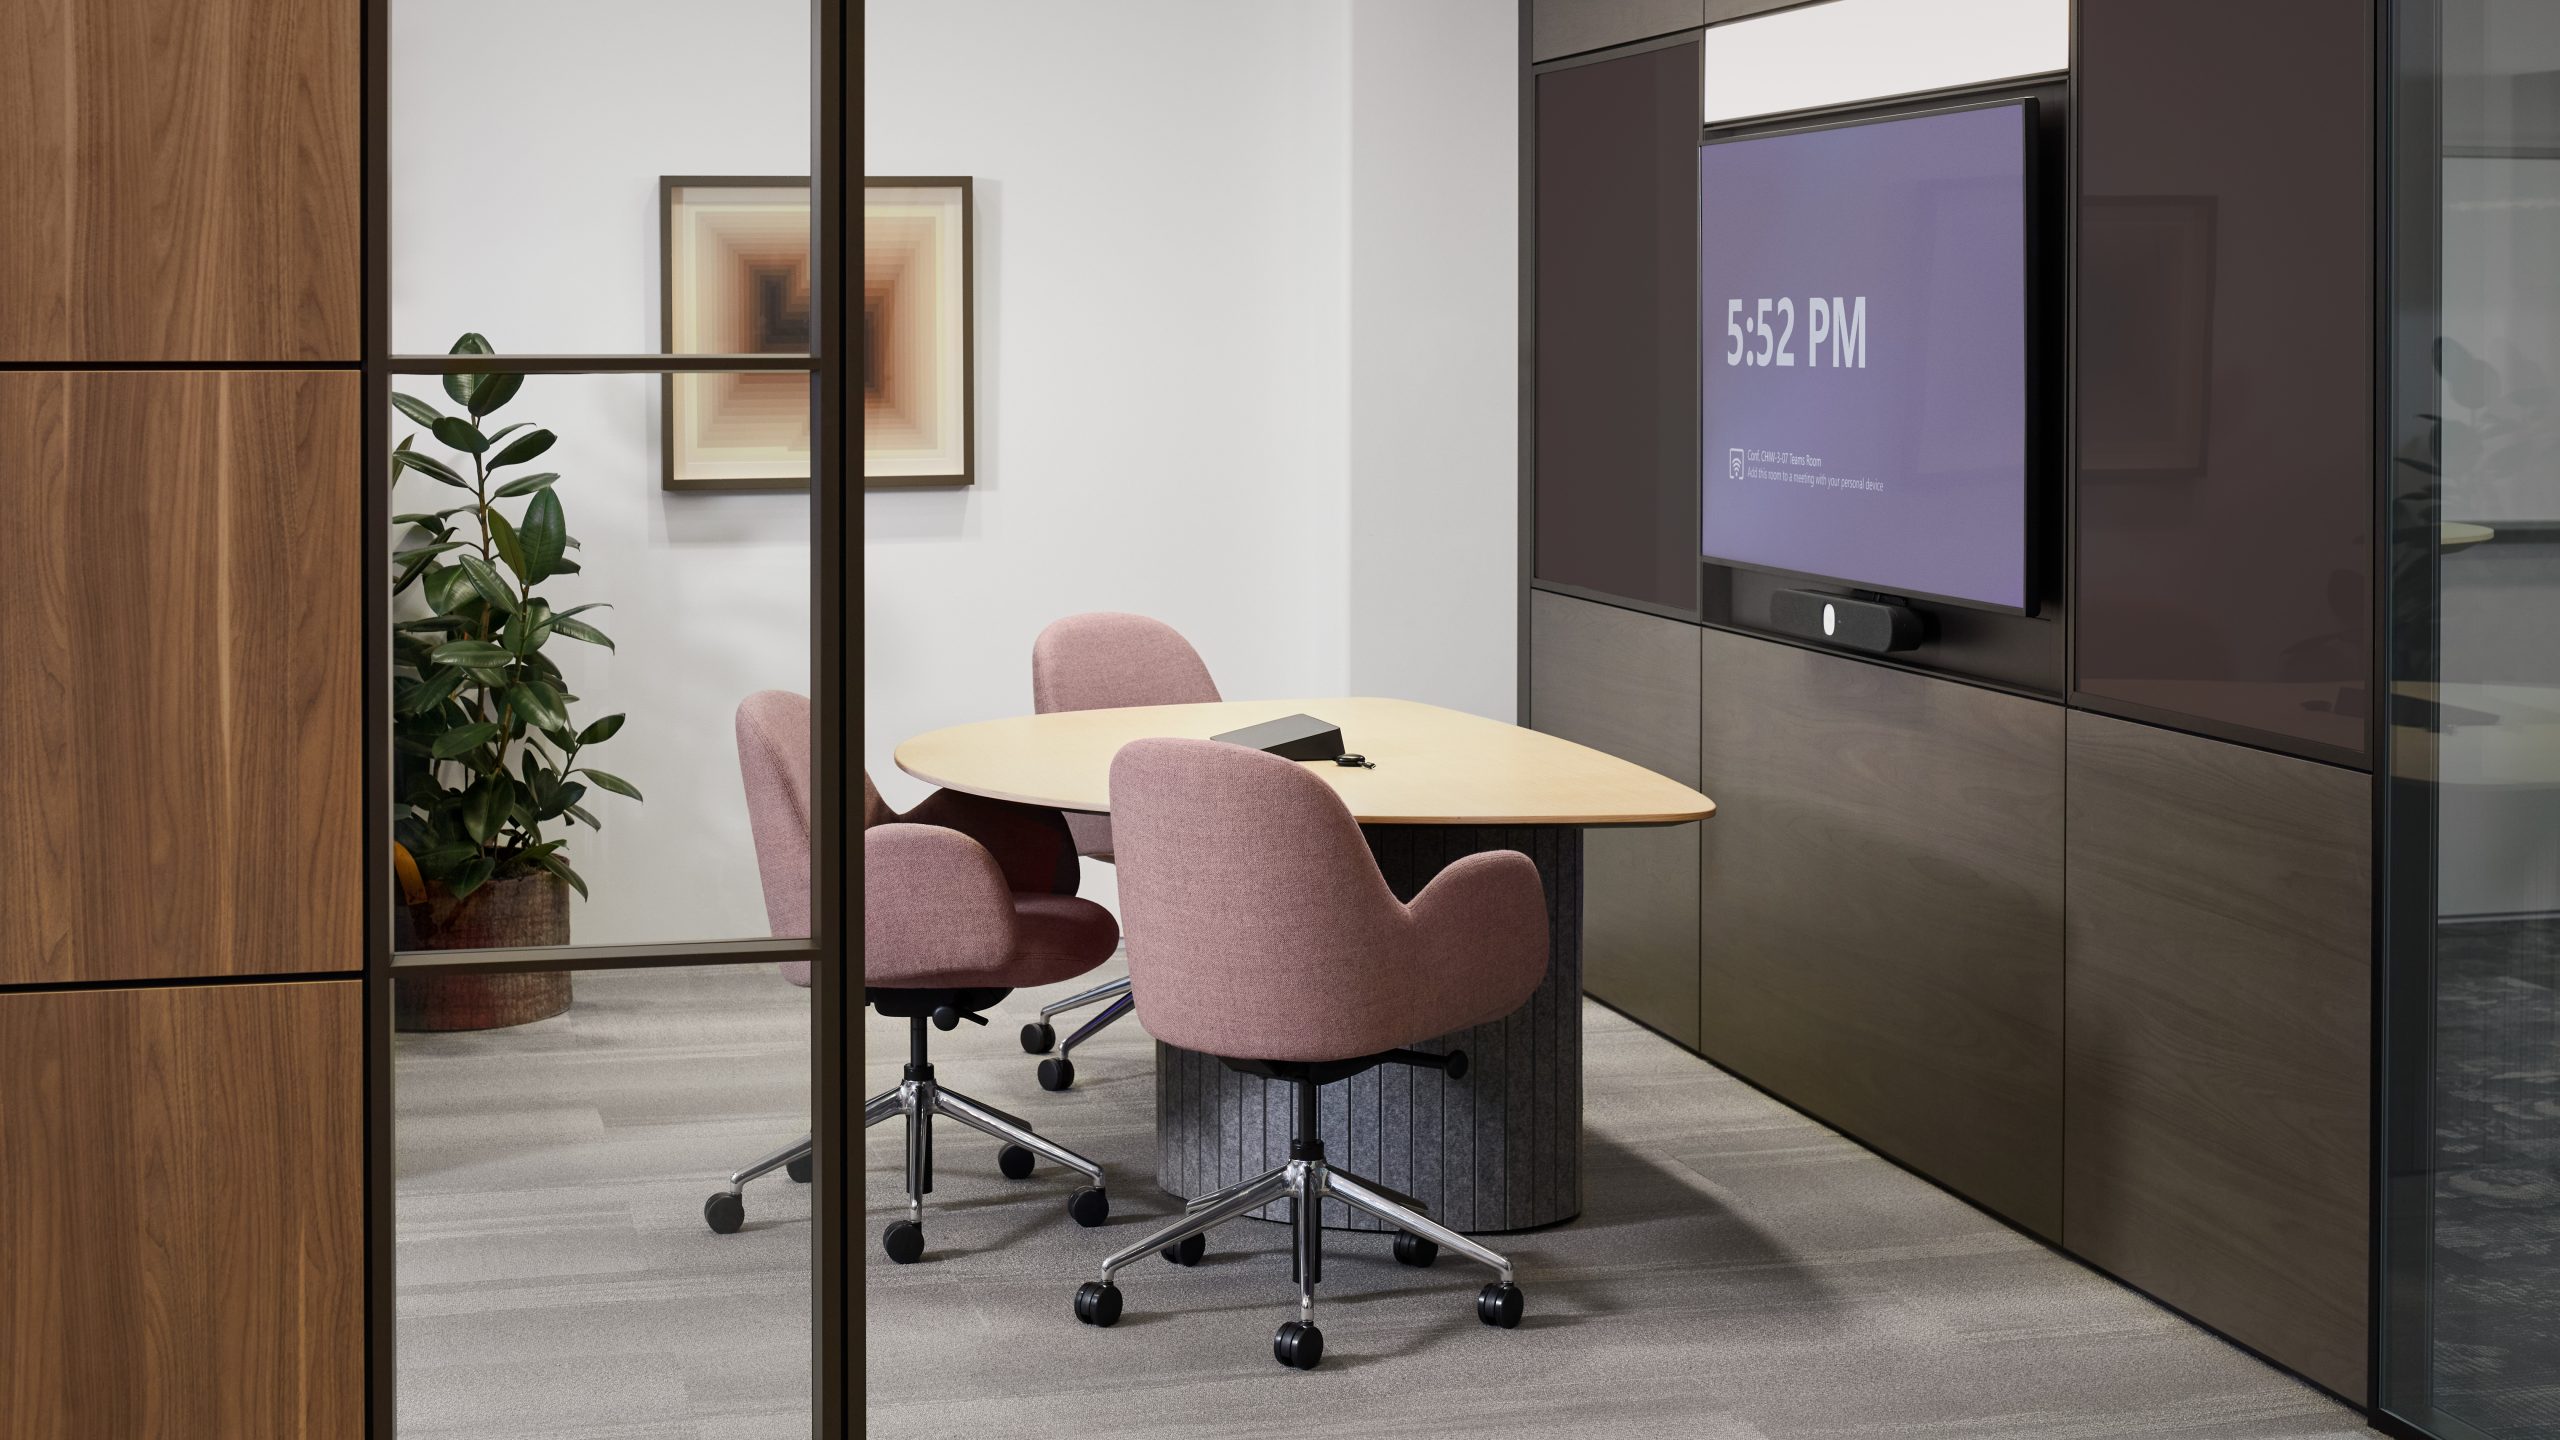 A Steelcase Ocular table is positioned facing a mounted television in an office setting.